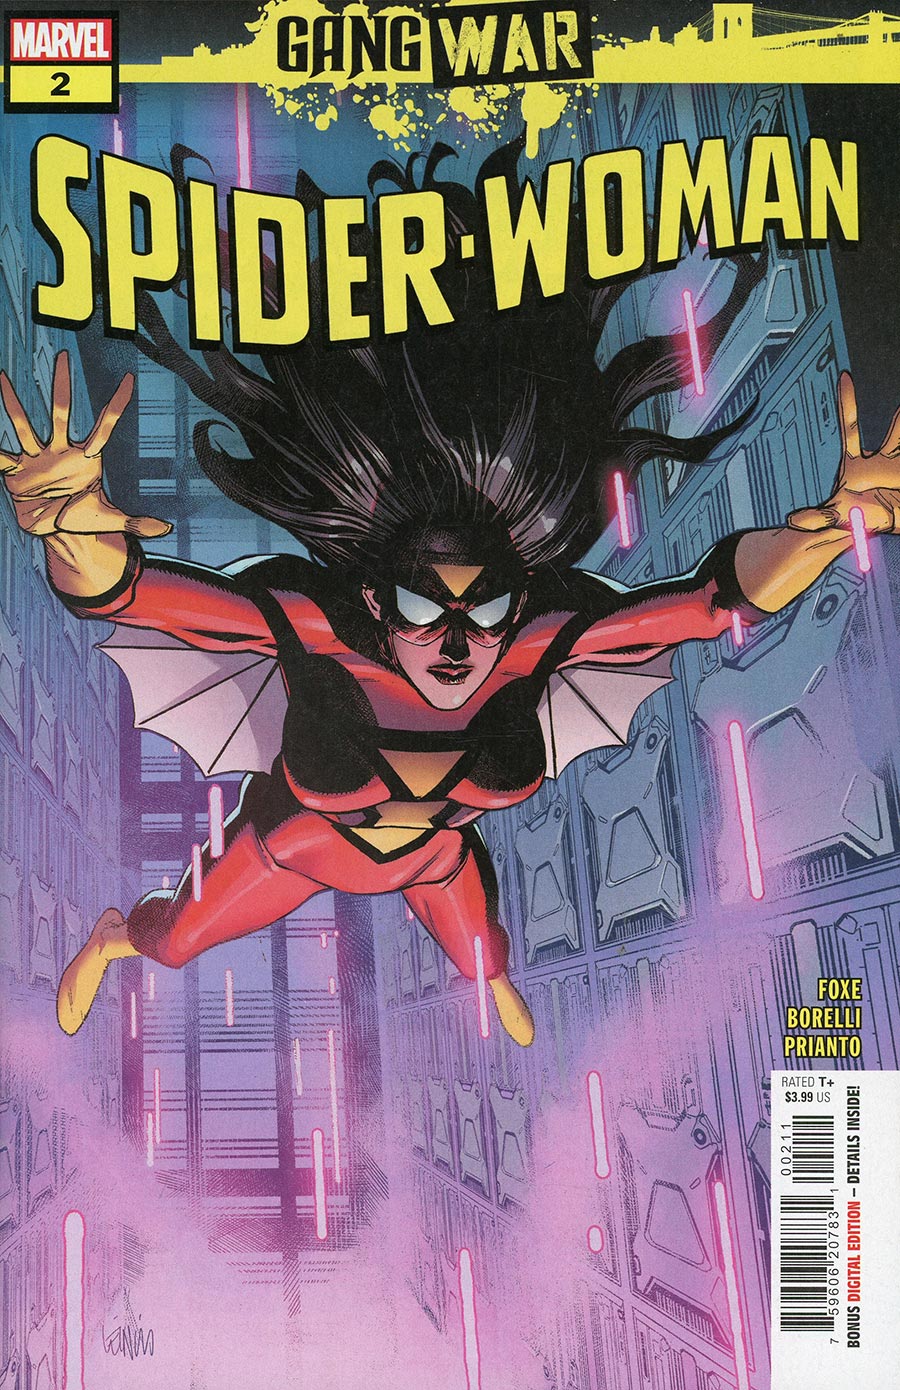 Spider-Woman Vol 8 #2 Cover A Regular Leinil Francis Yu Cover (Gang War Tie-In)